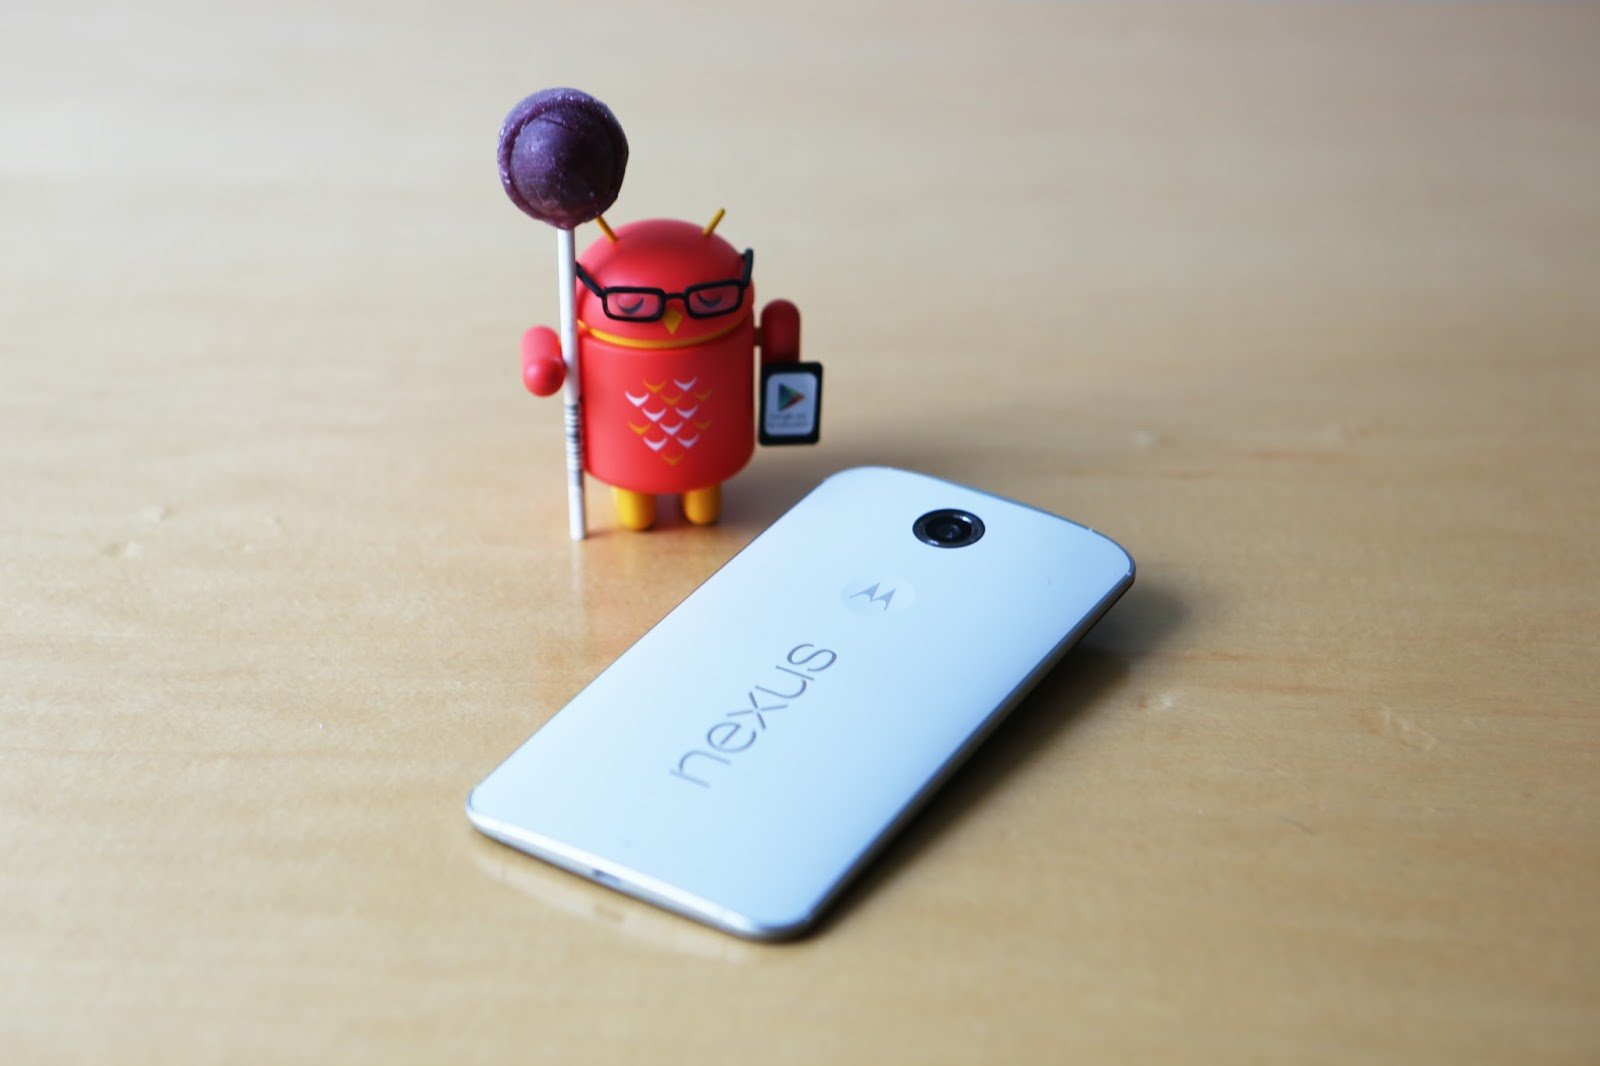 The Nexus 6 pre-order start time is not confirmed, but expect it at 10 AM or 11 AM Pacific.